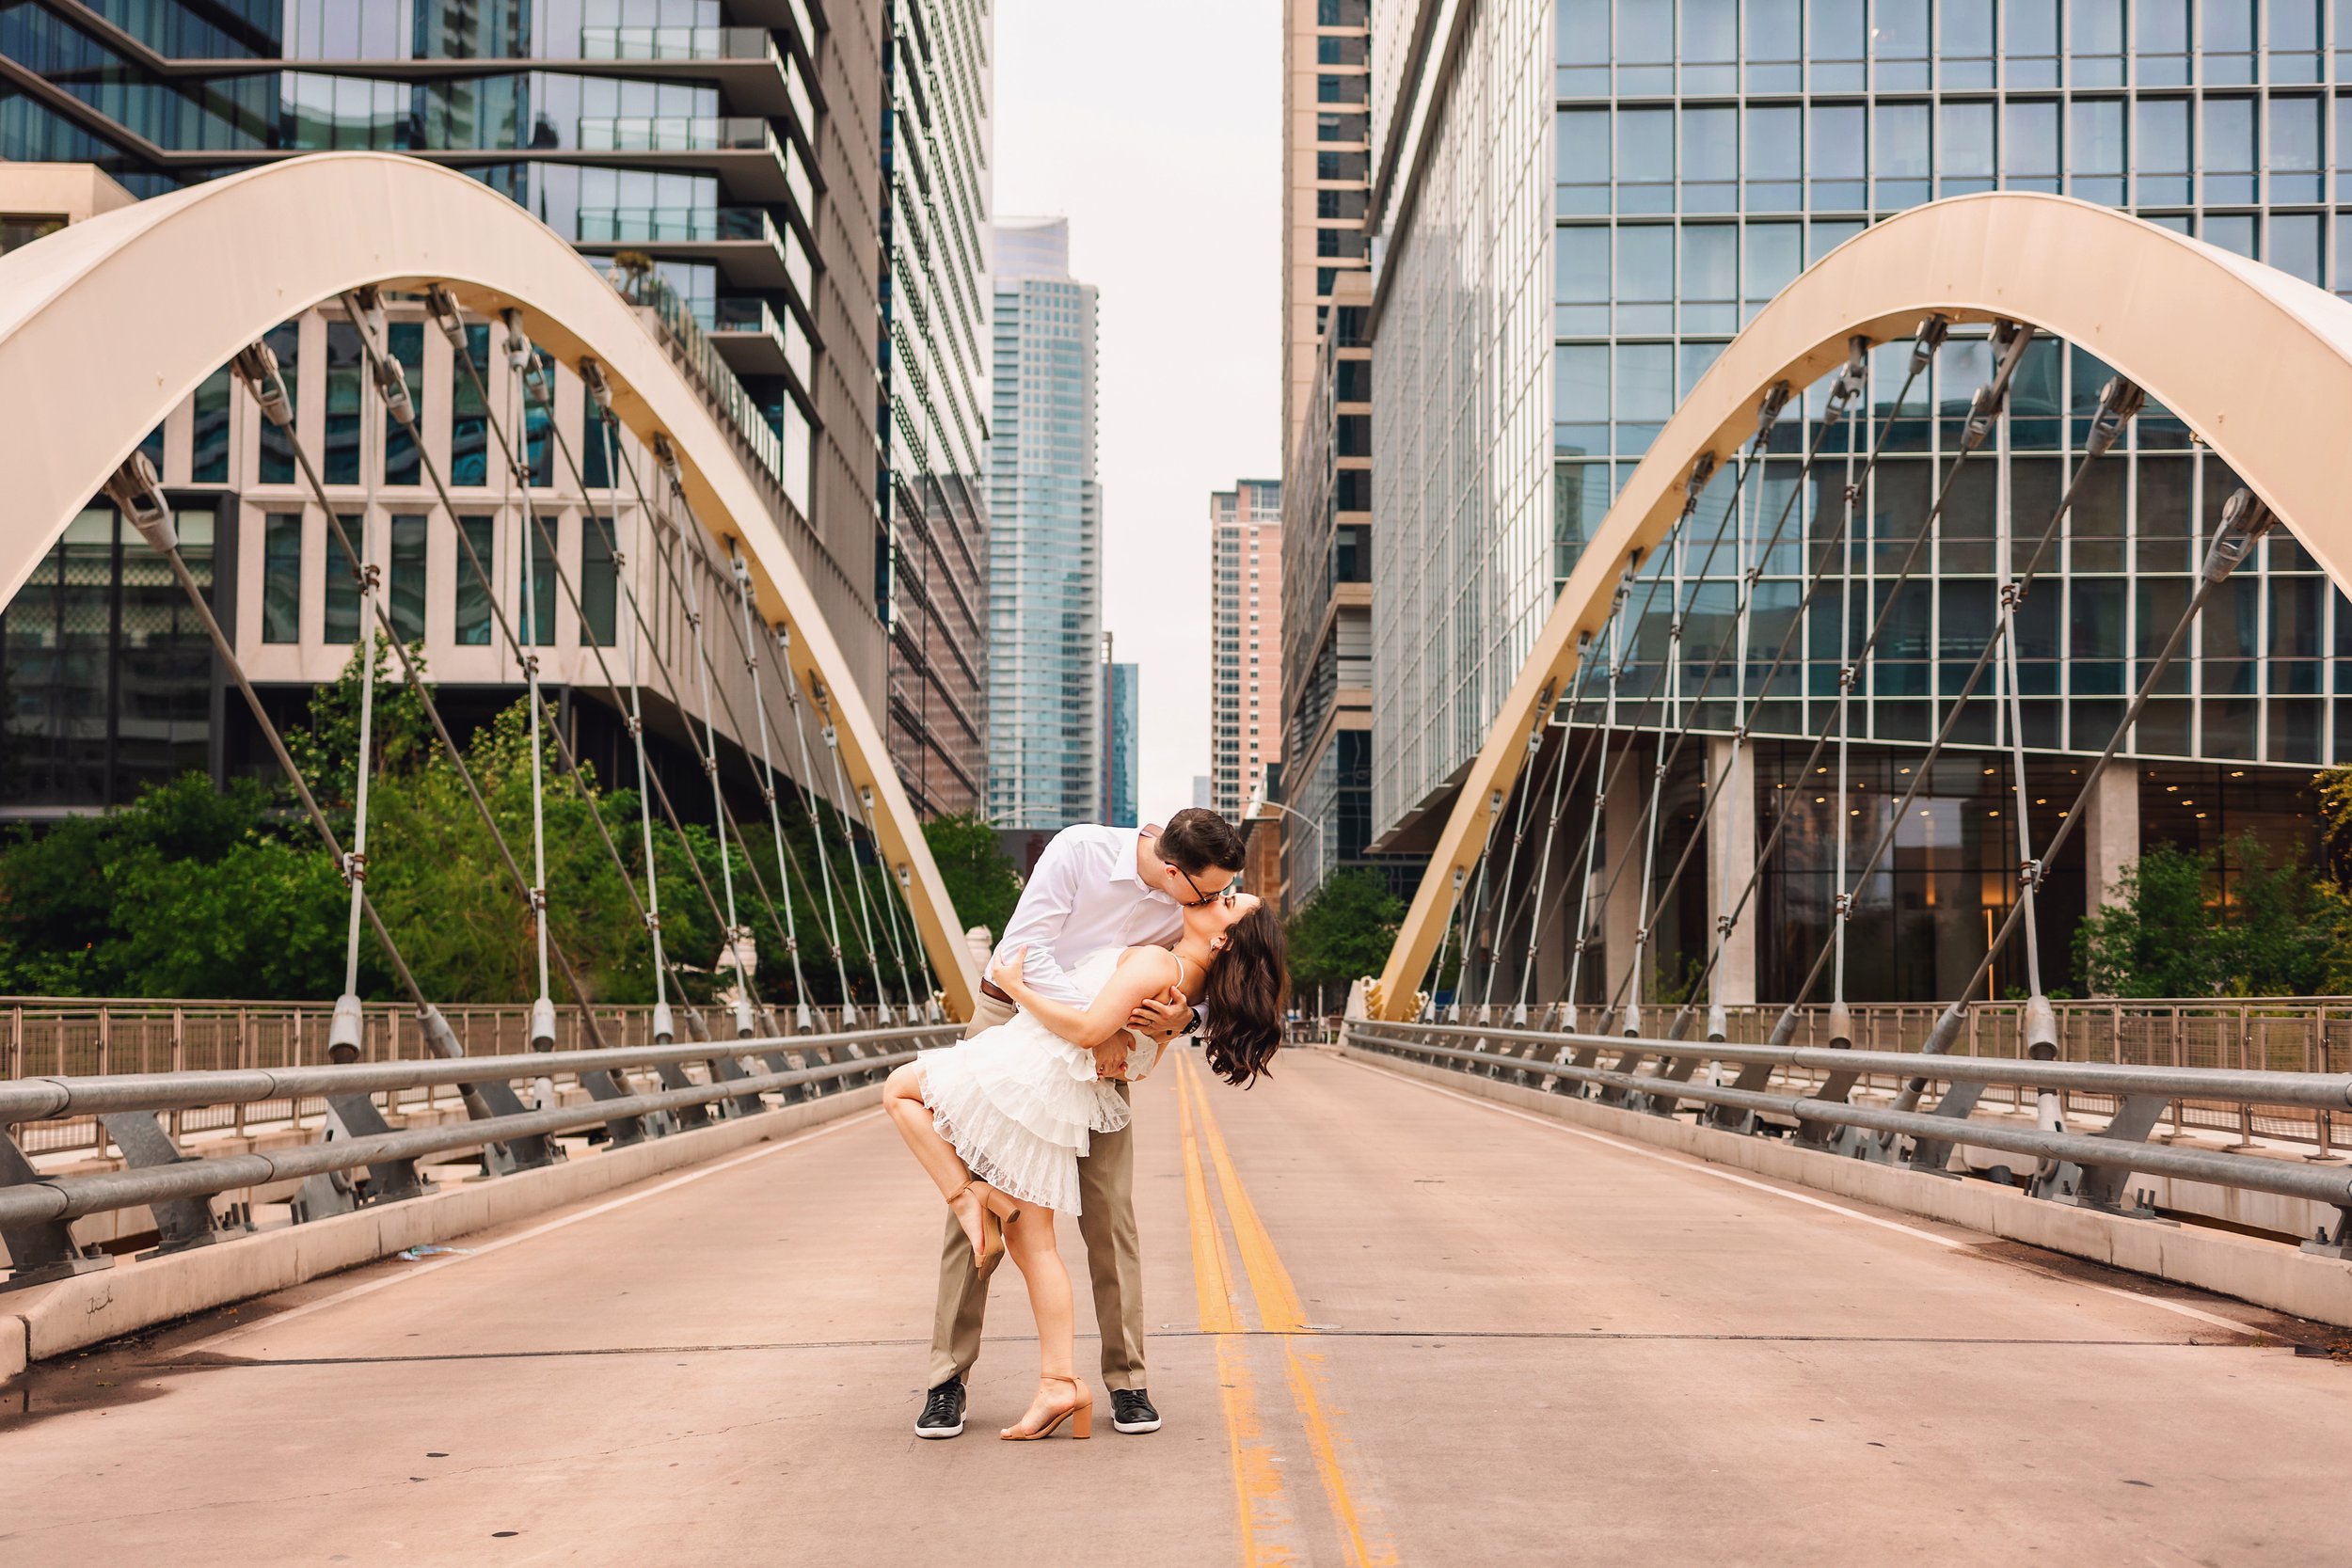 downtown austin texas engagement photography session